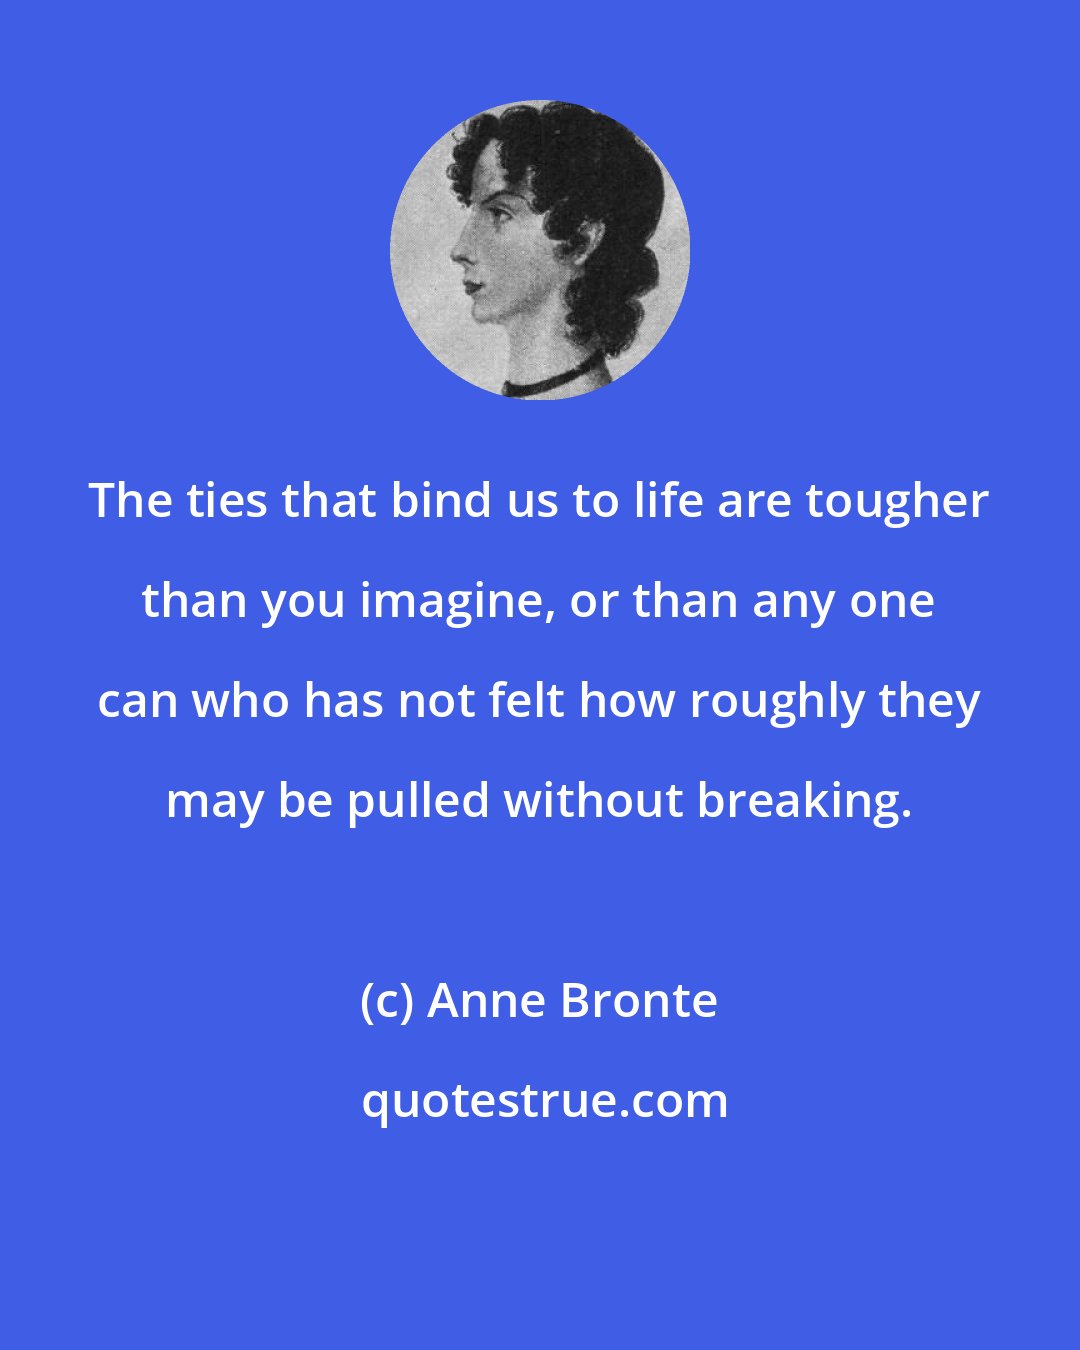 Anne Bronte: The ties that bind us to life are tougher than you imagine, or than any one can who has not felt how roughly they may be pulled without breaking.